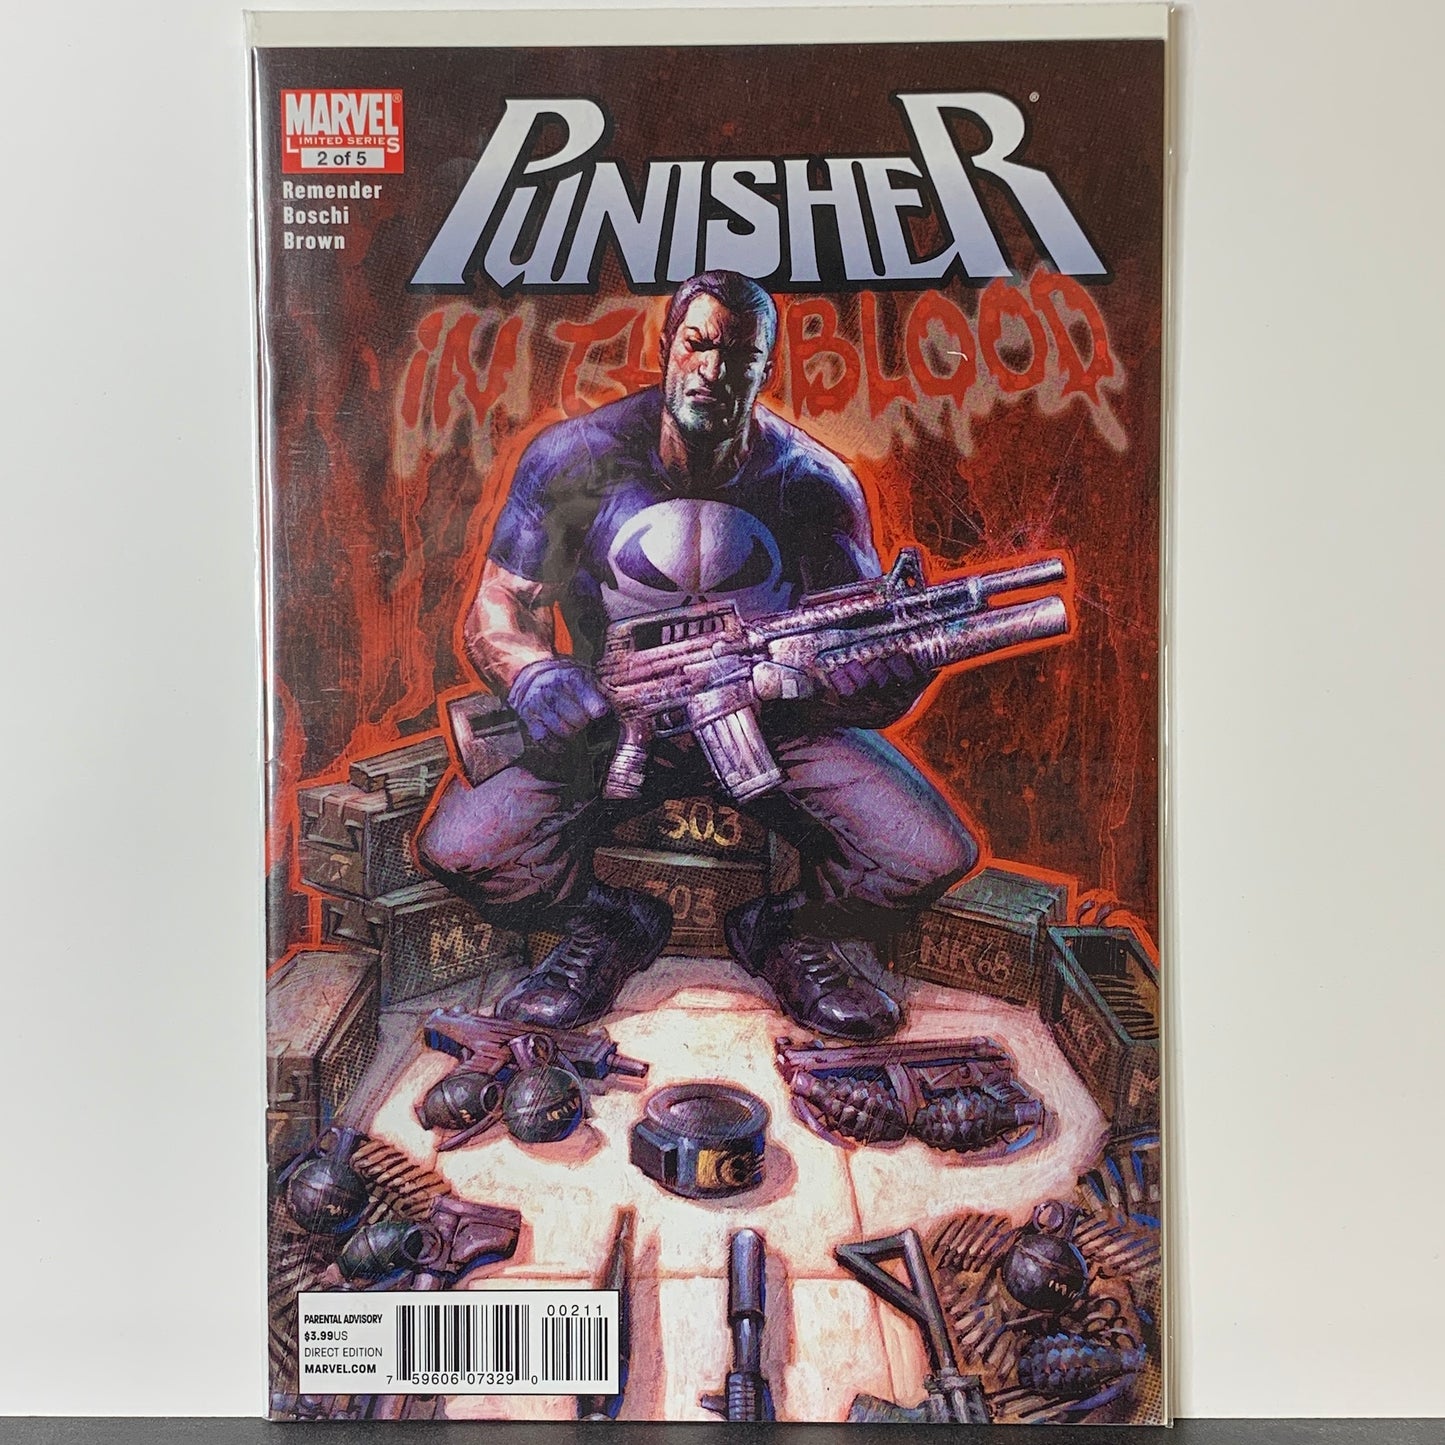 Punisher: In the Blood (2010) #2 (VF)